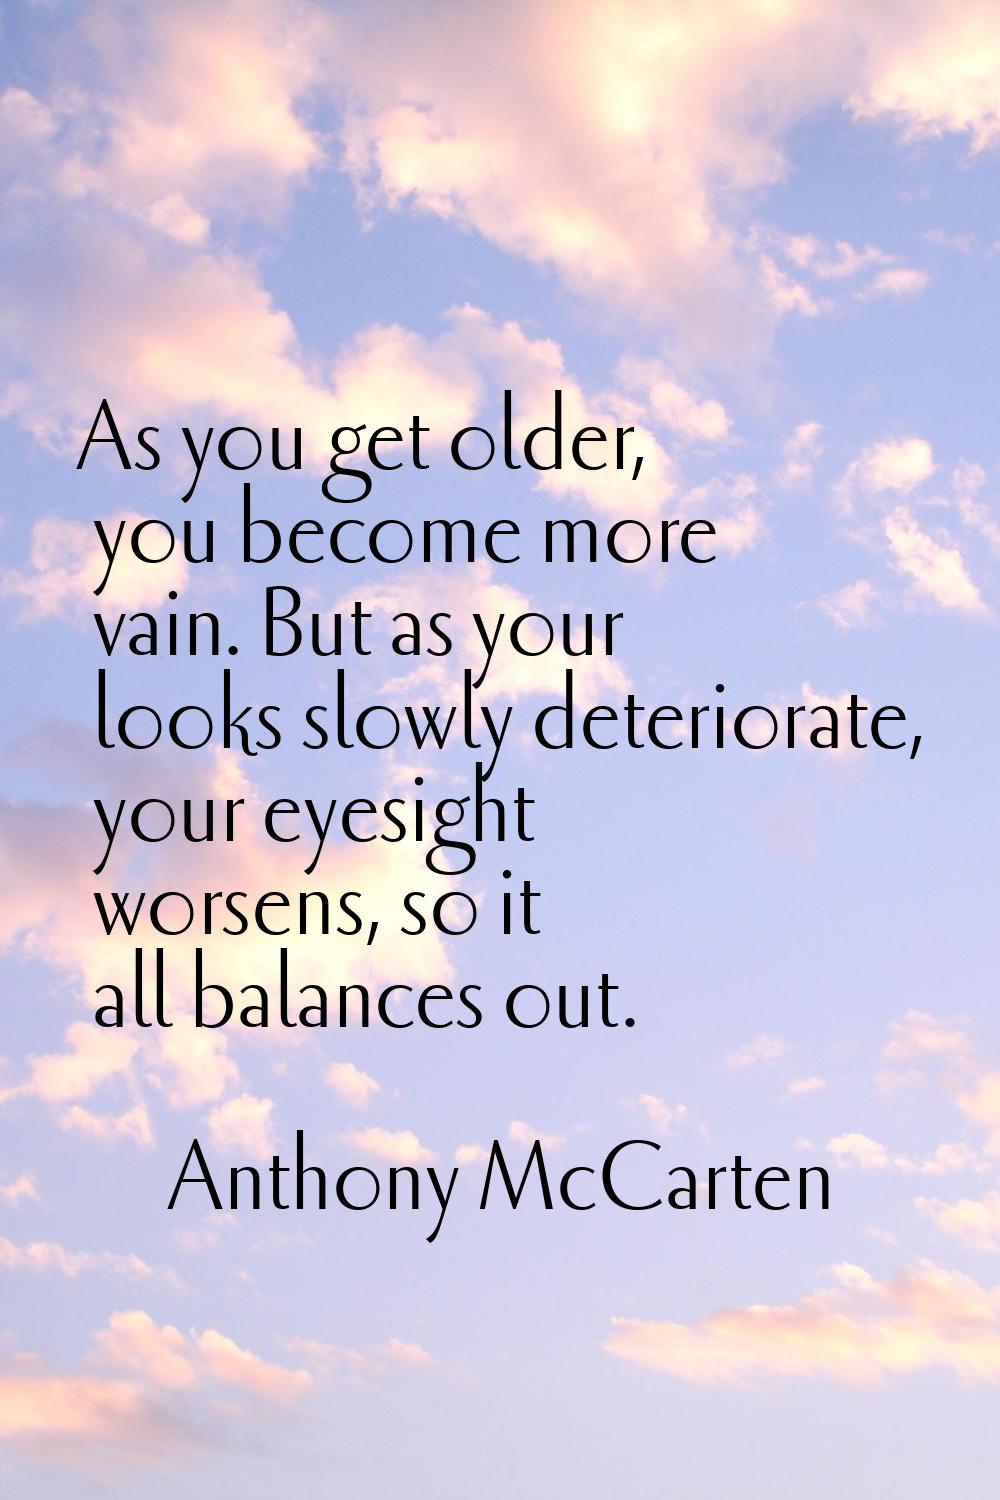 As you get older, you become more vain. But as your looks slowly deteriorate, your eyesight worsens